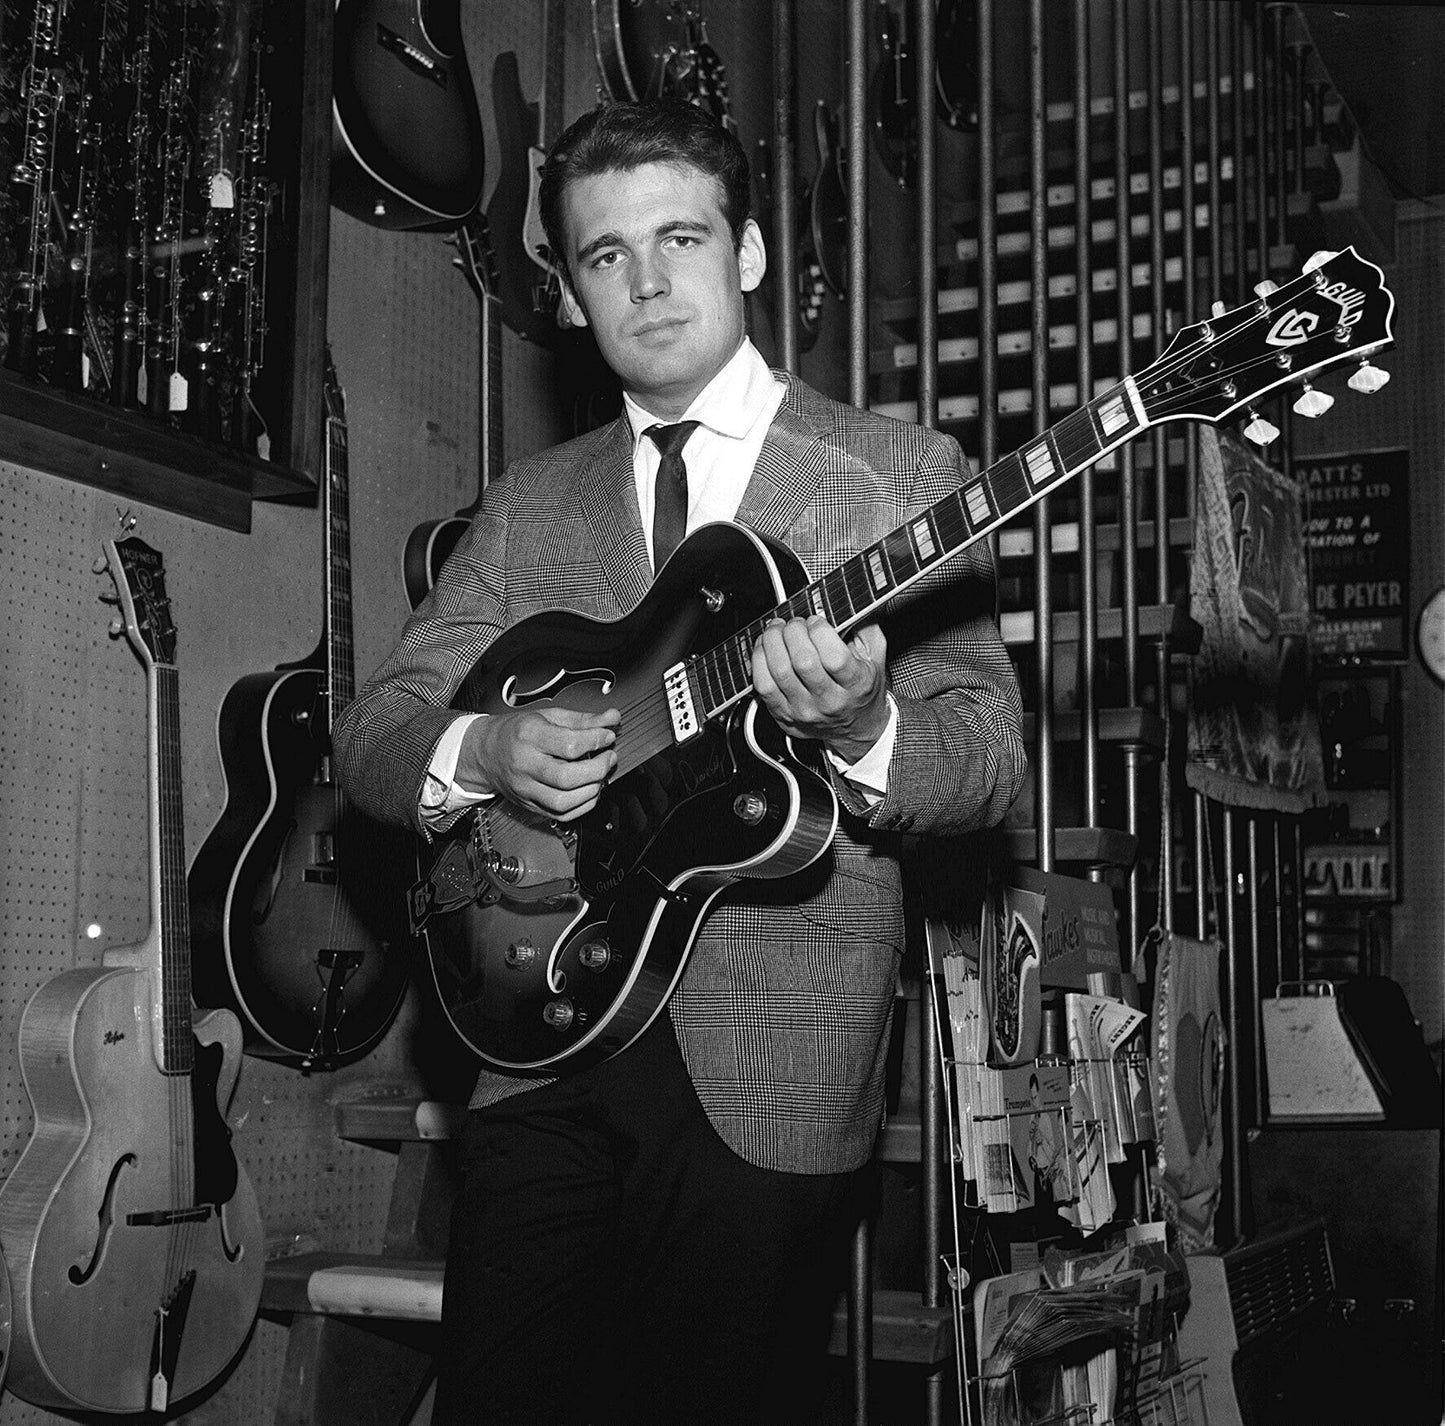 Duane Eddy - At an Instrument Store, England, 1963 Print 2